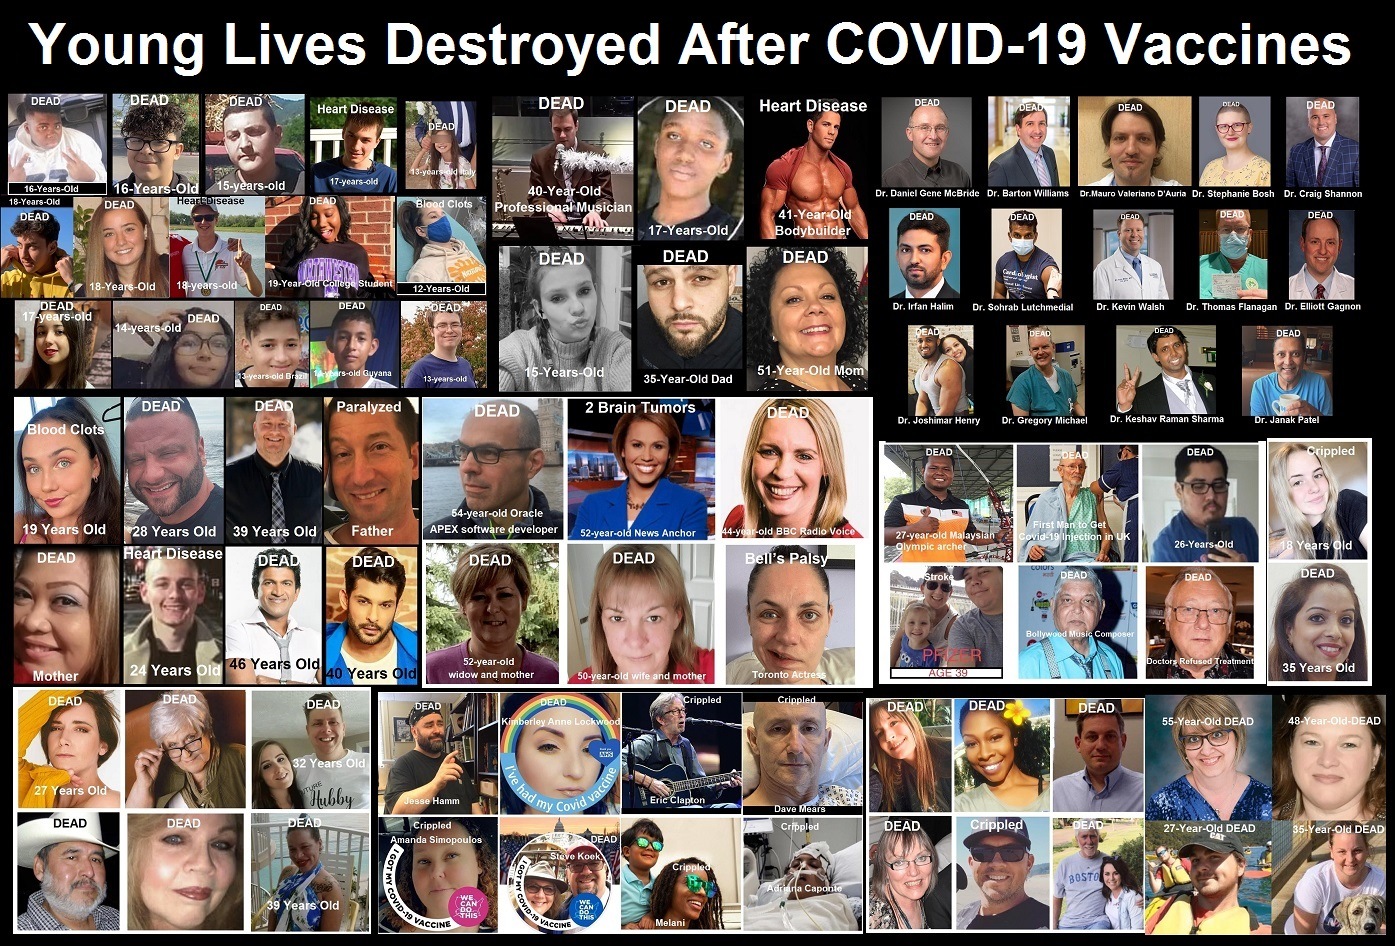 You-Lives-destroyed-from-COVID-Vaccines (2).jpg